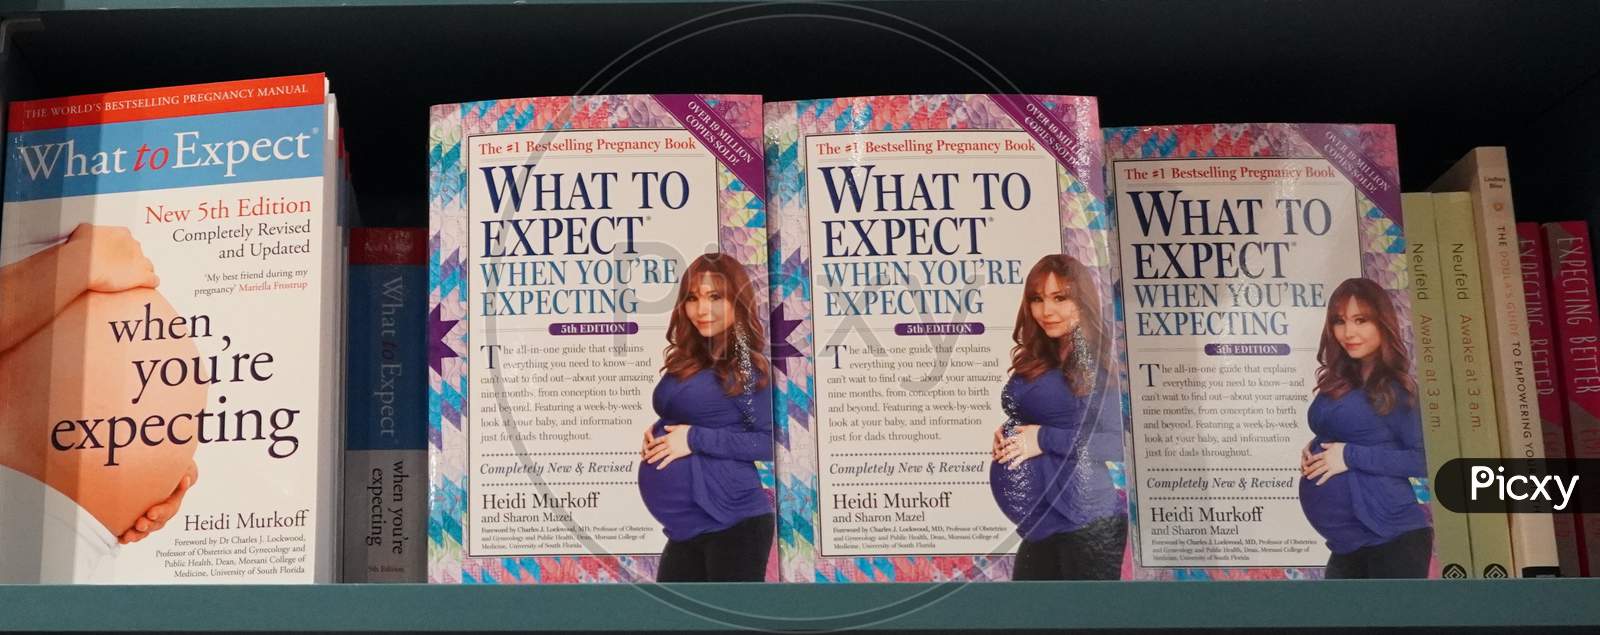 Bookshelf In Library With Many Parenting Books For Sale. Parenting, Toddler Guidebooks. Children Books. Toddler Books. What To Expect When You Are Expecting. Pregnancy Guide - Dubai Uae December 2019